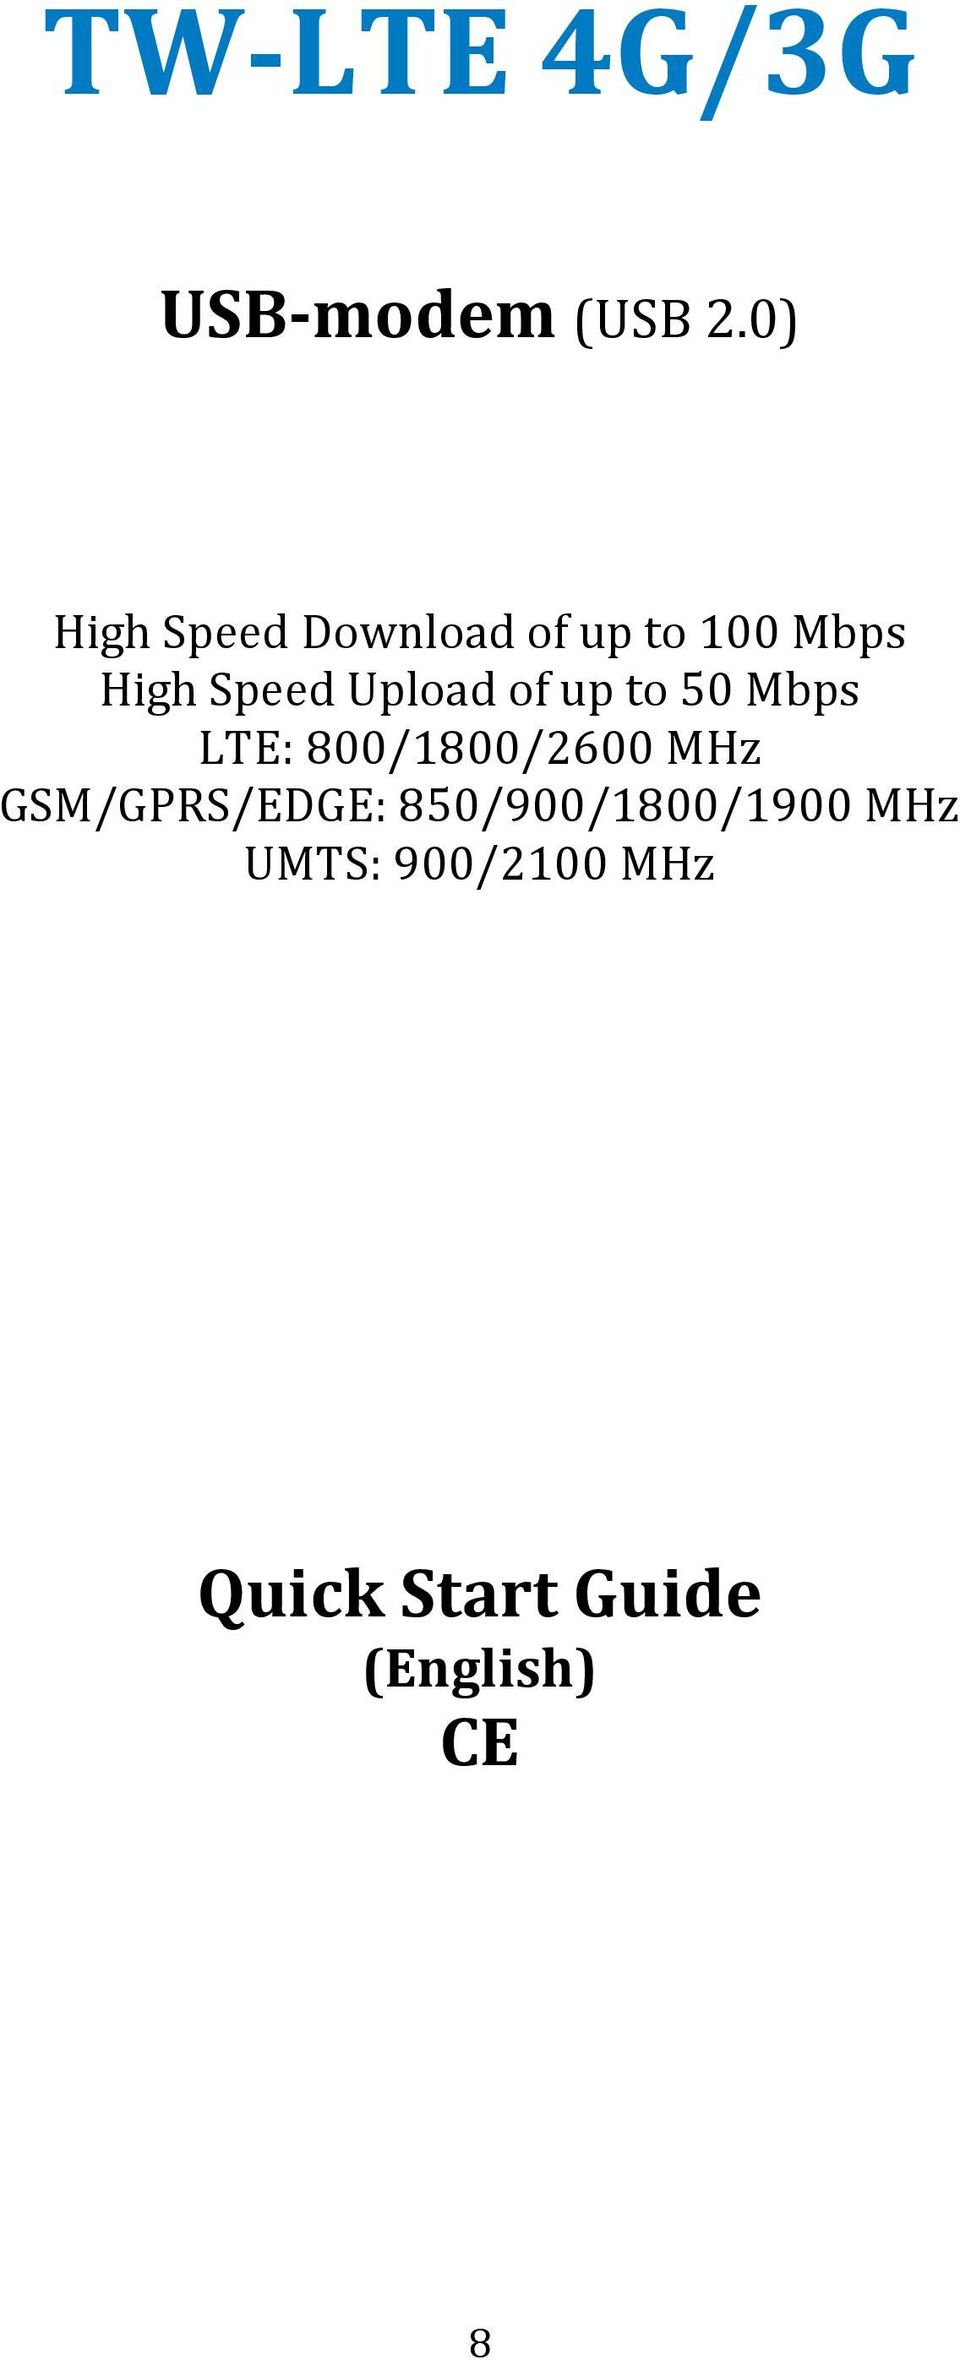 Upload of up to 50 Mbps LTE: 800/1800/2600 MHz